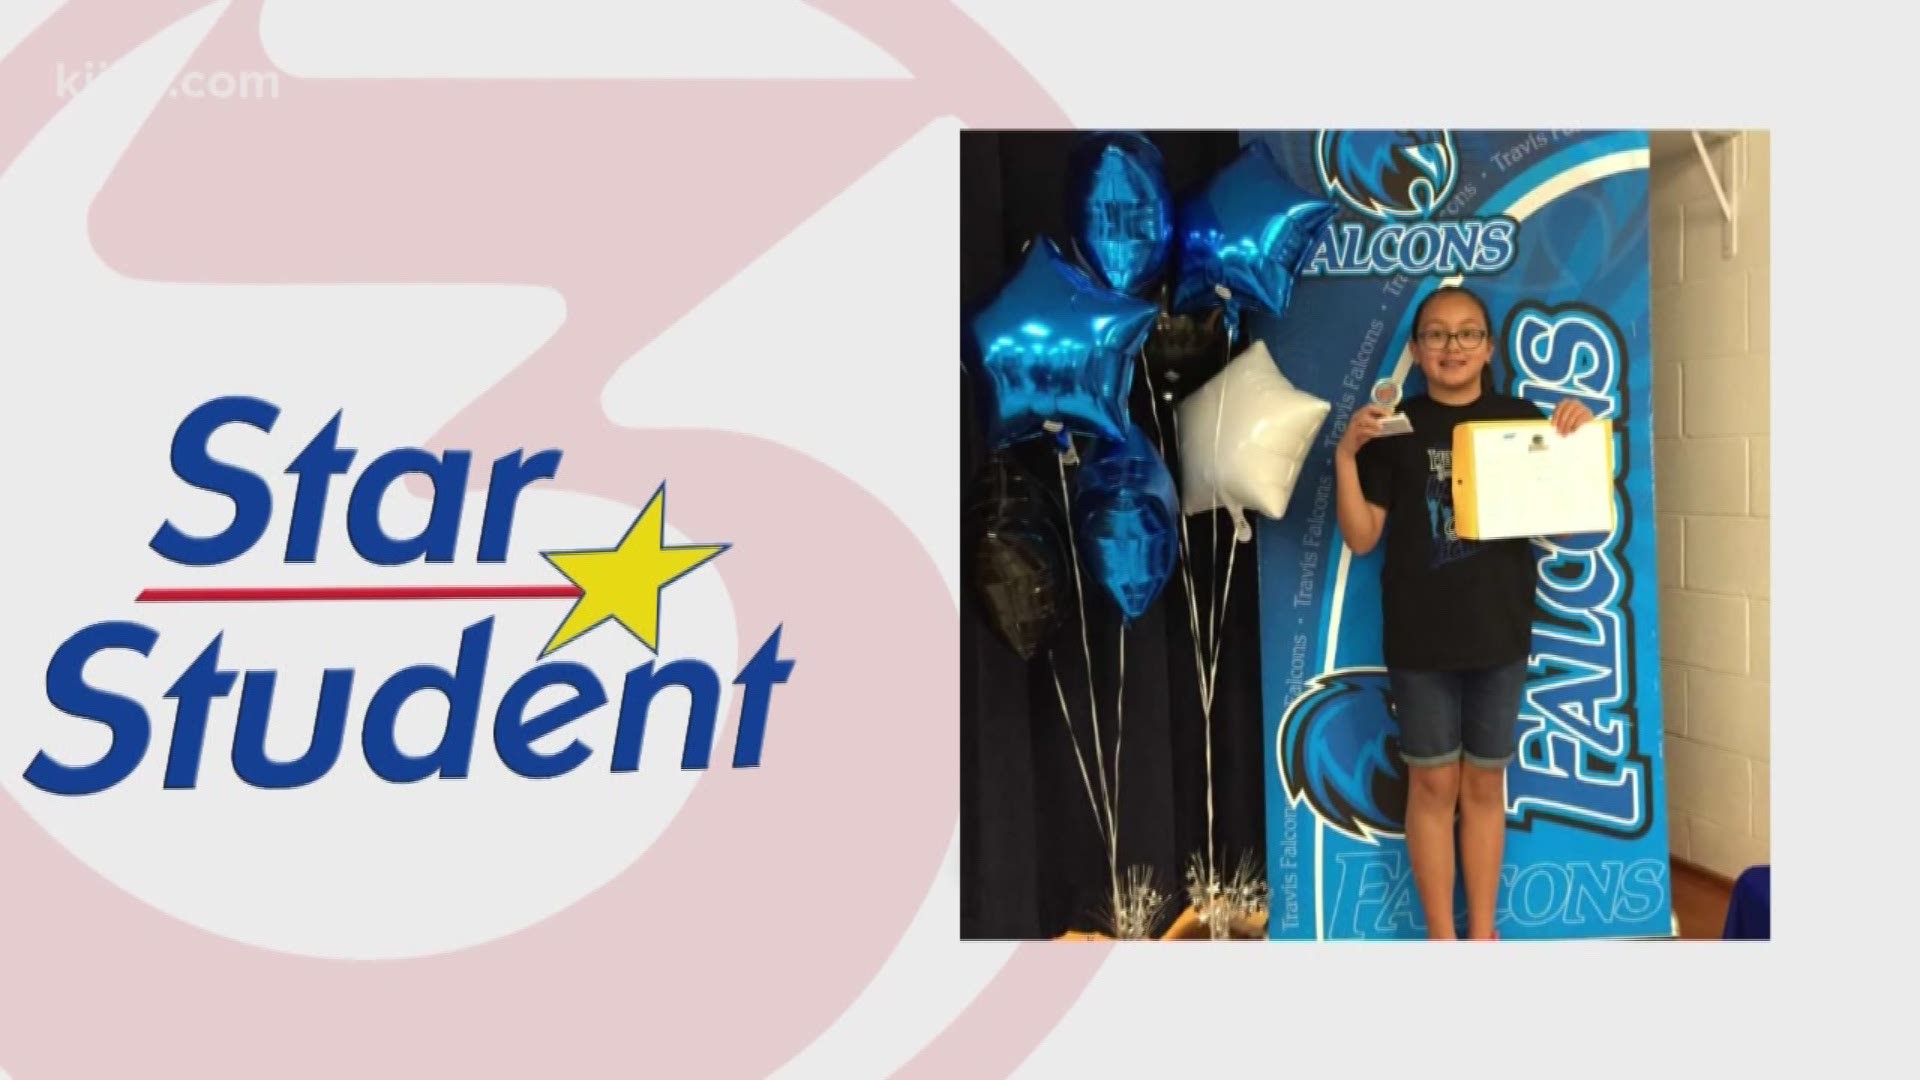 Congratulations to this week's 3 Star Student, Katiana Sanchez from W.B. Travis Elementary.